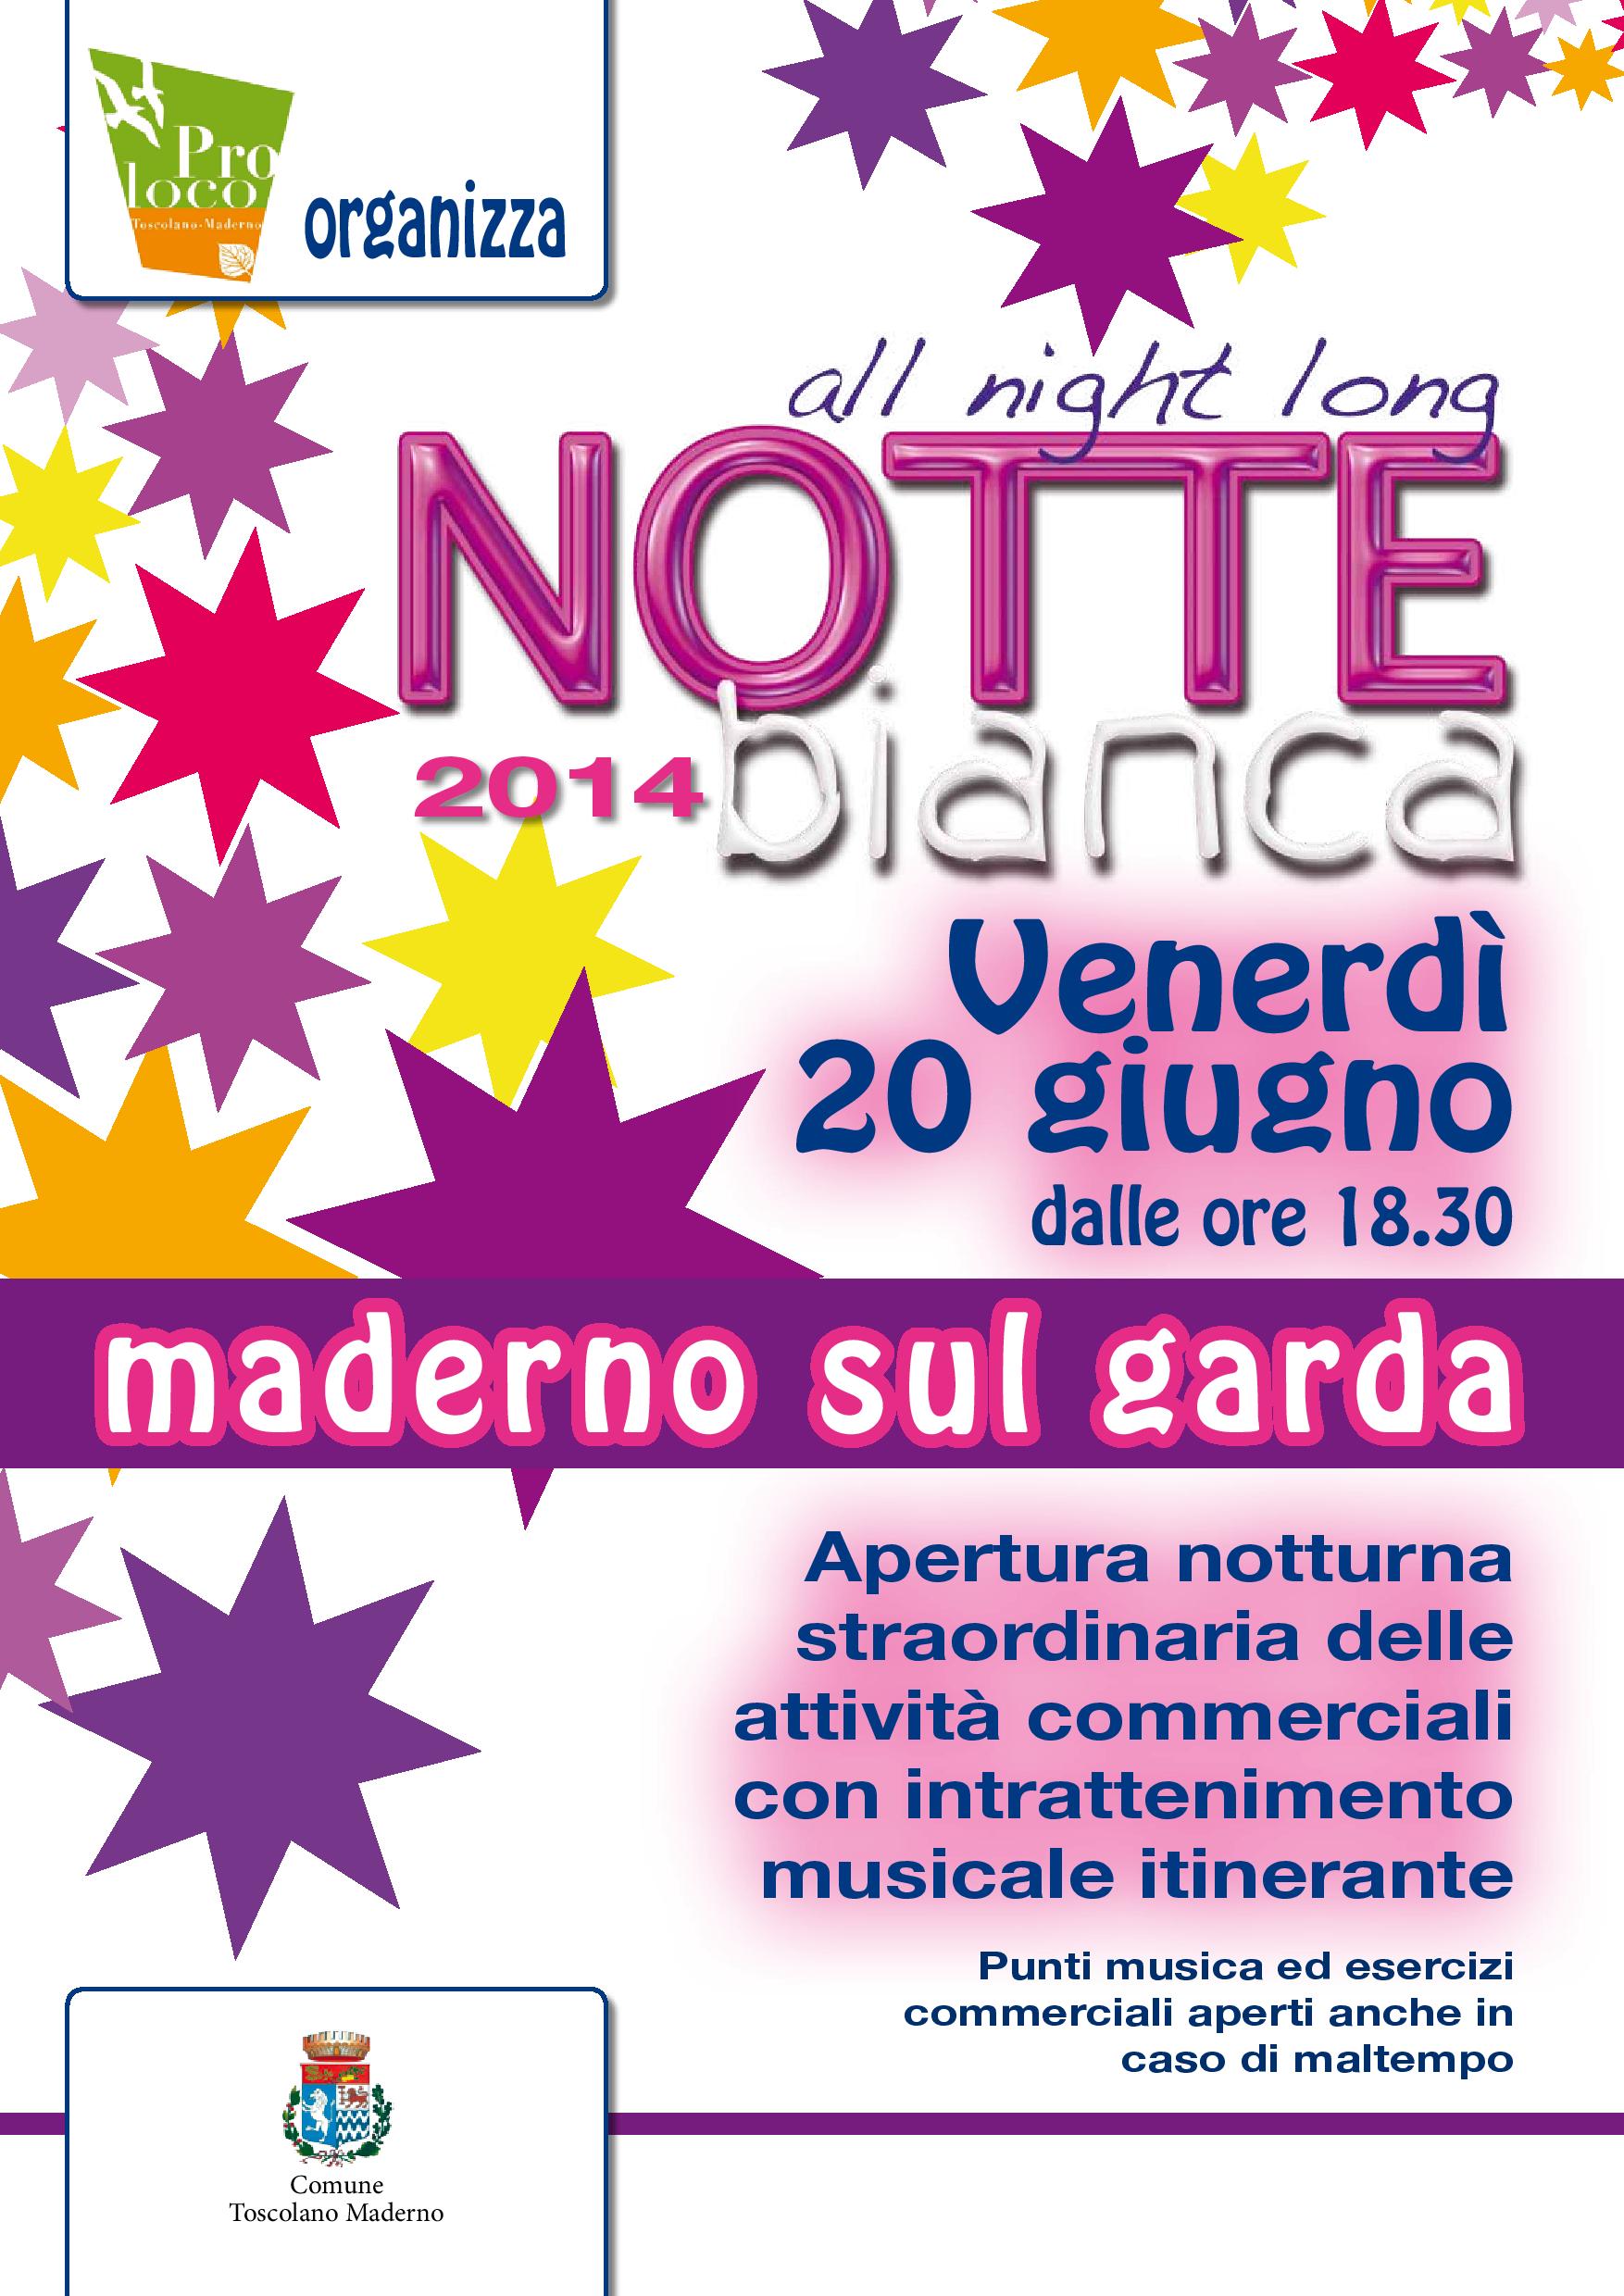 Lake Garda Events - Notte_Bianca-Toscolano Maderno 2014-page-001